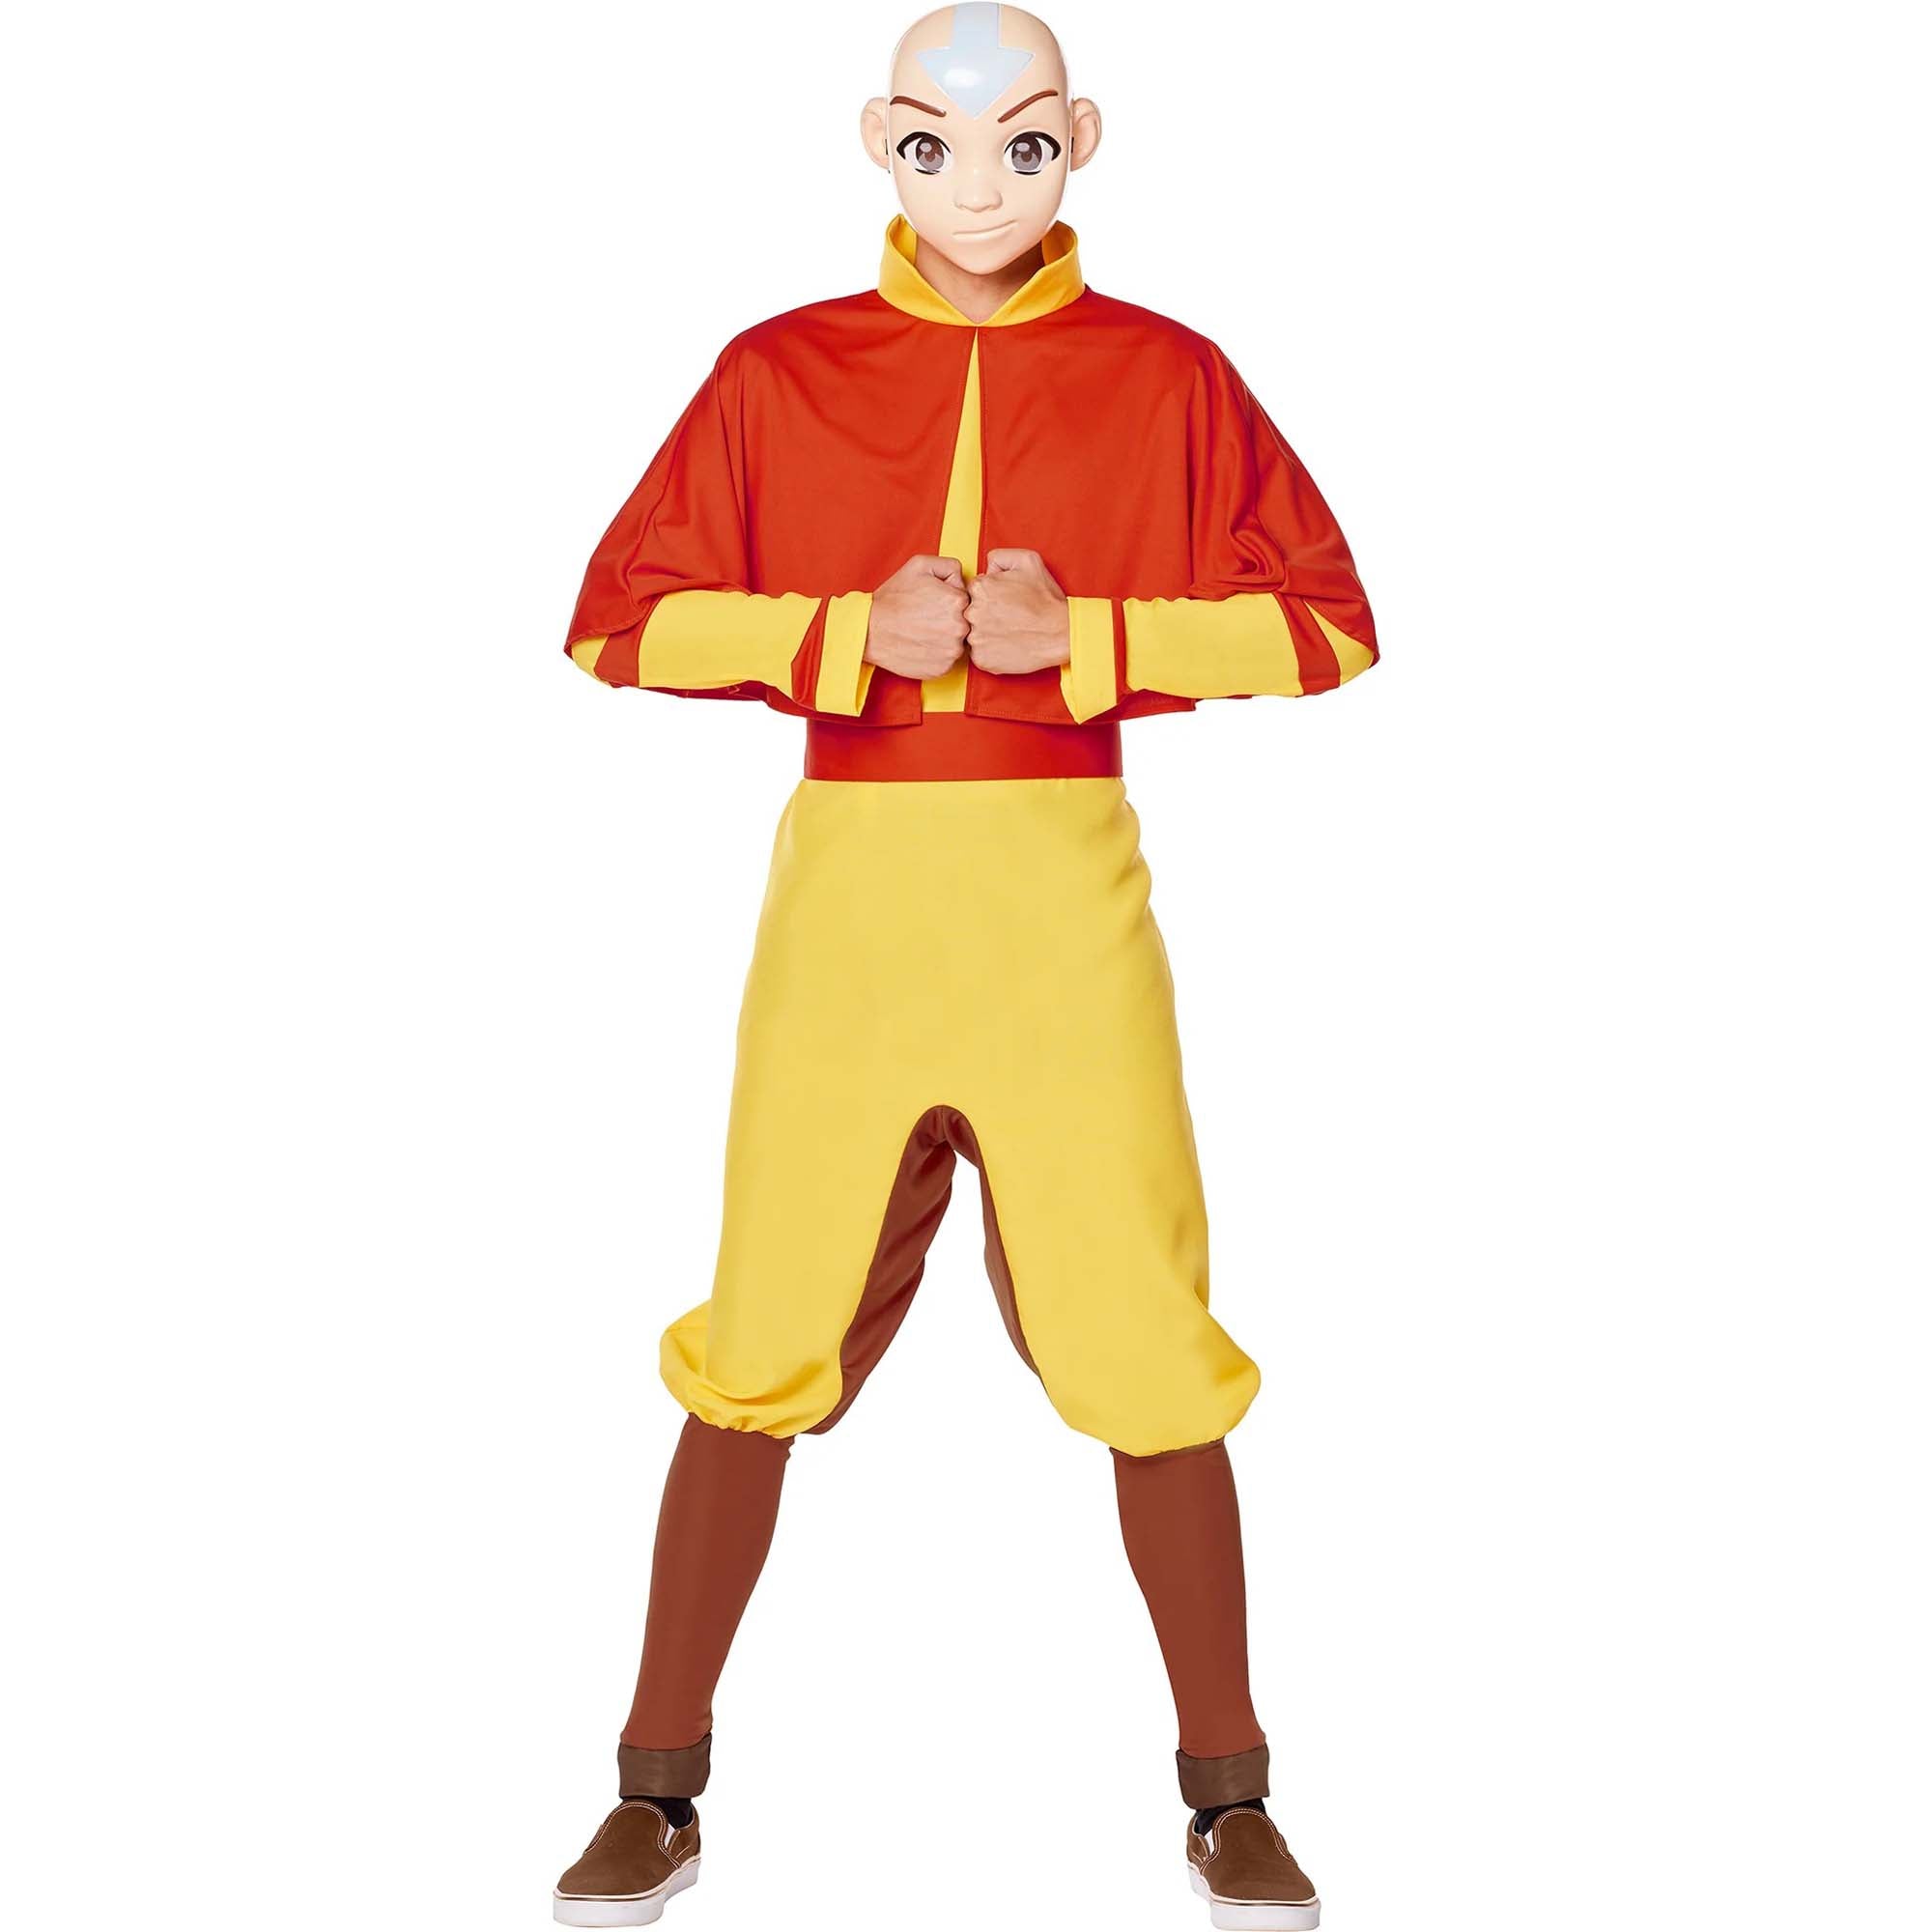 Avatar Aang Costume for Adults, Red and Yellow Jumpsuit